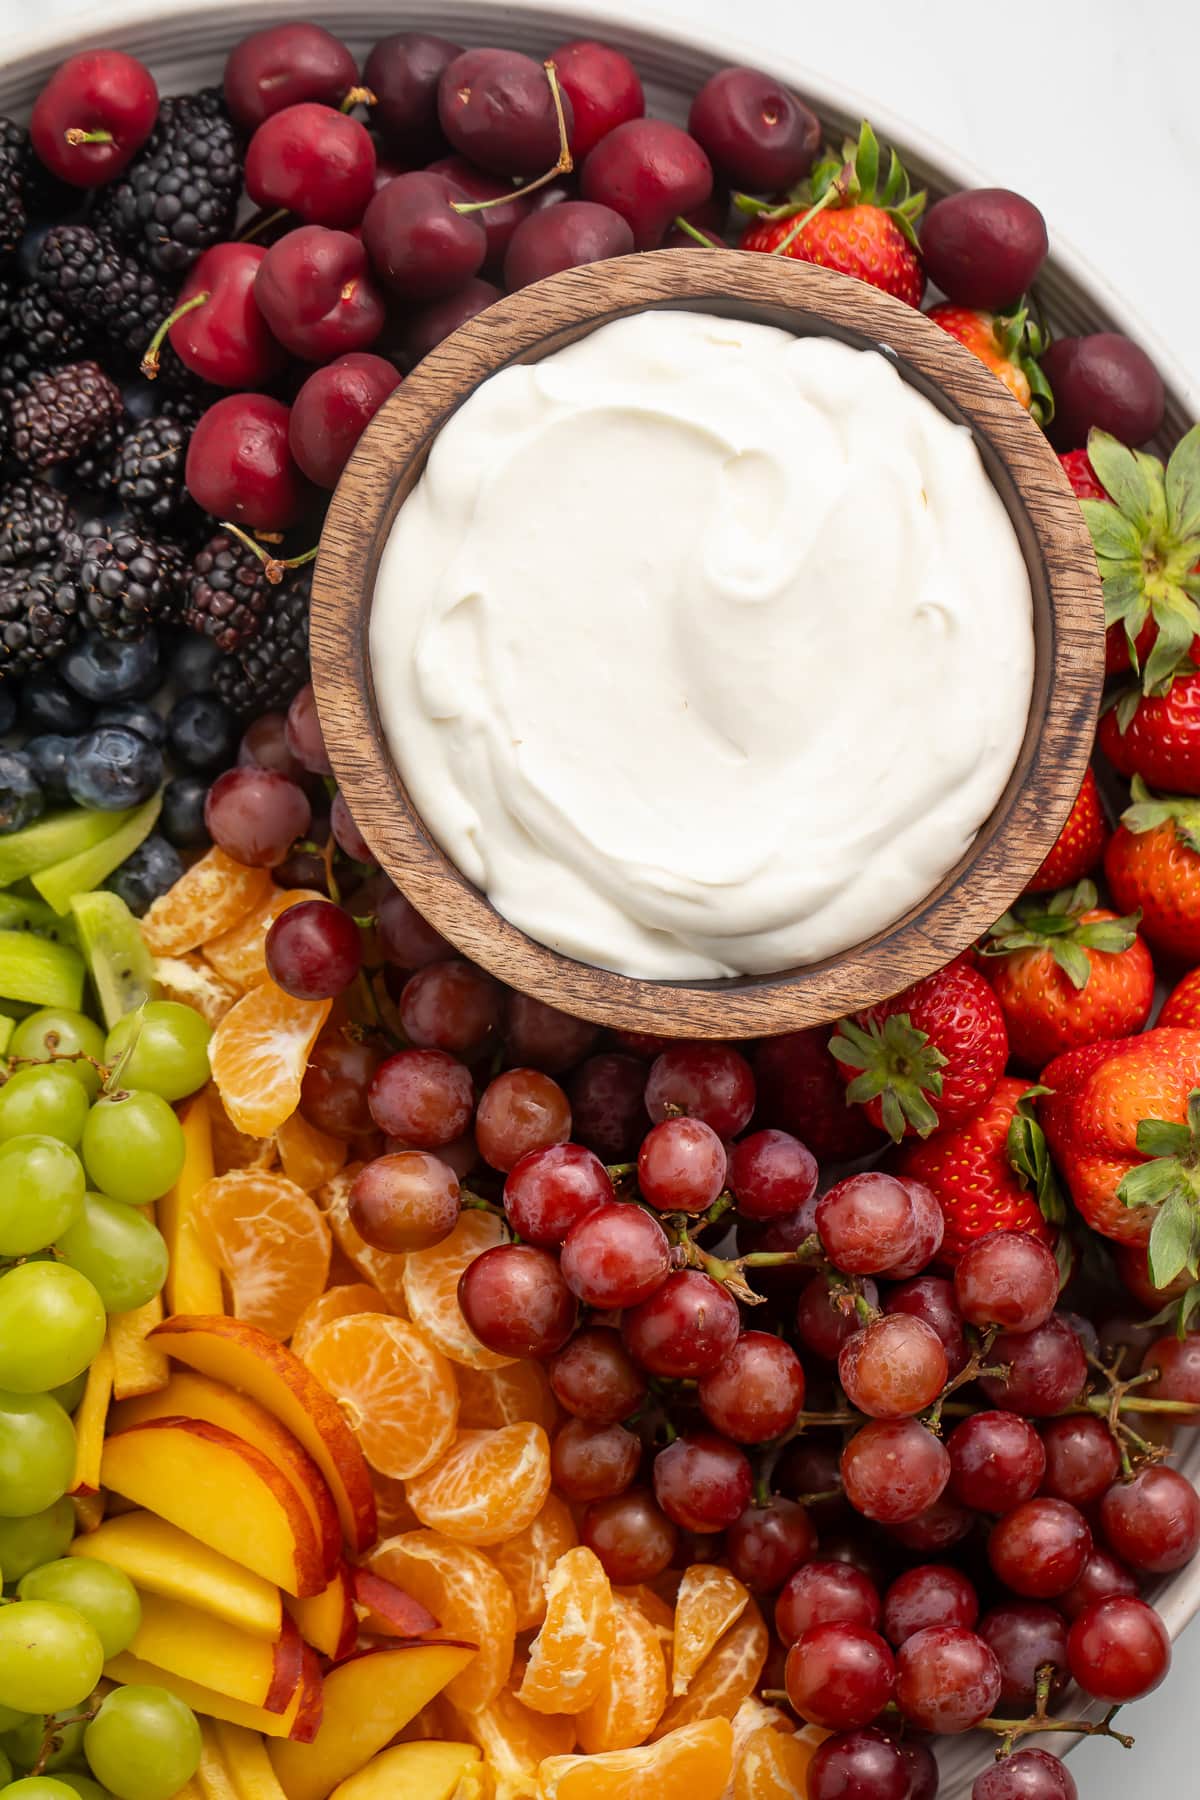 A small wooden bowl containing a white, whipped cream cheese dip on a platter surrounded by a rainbow of fruit.